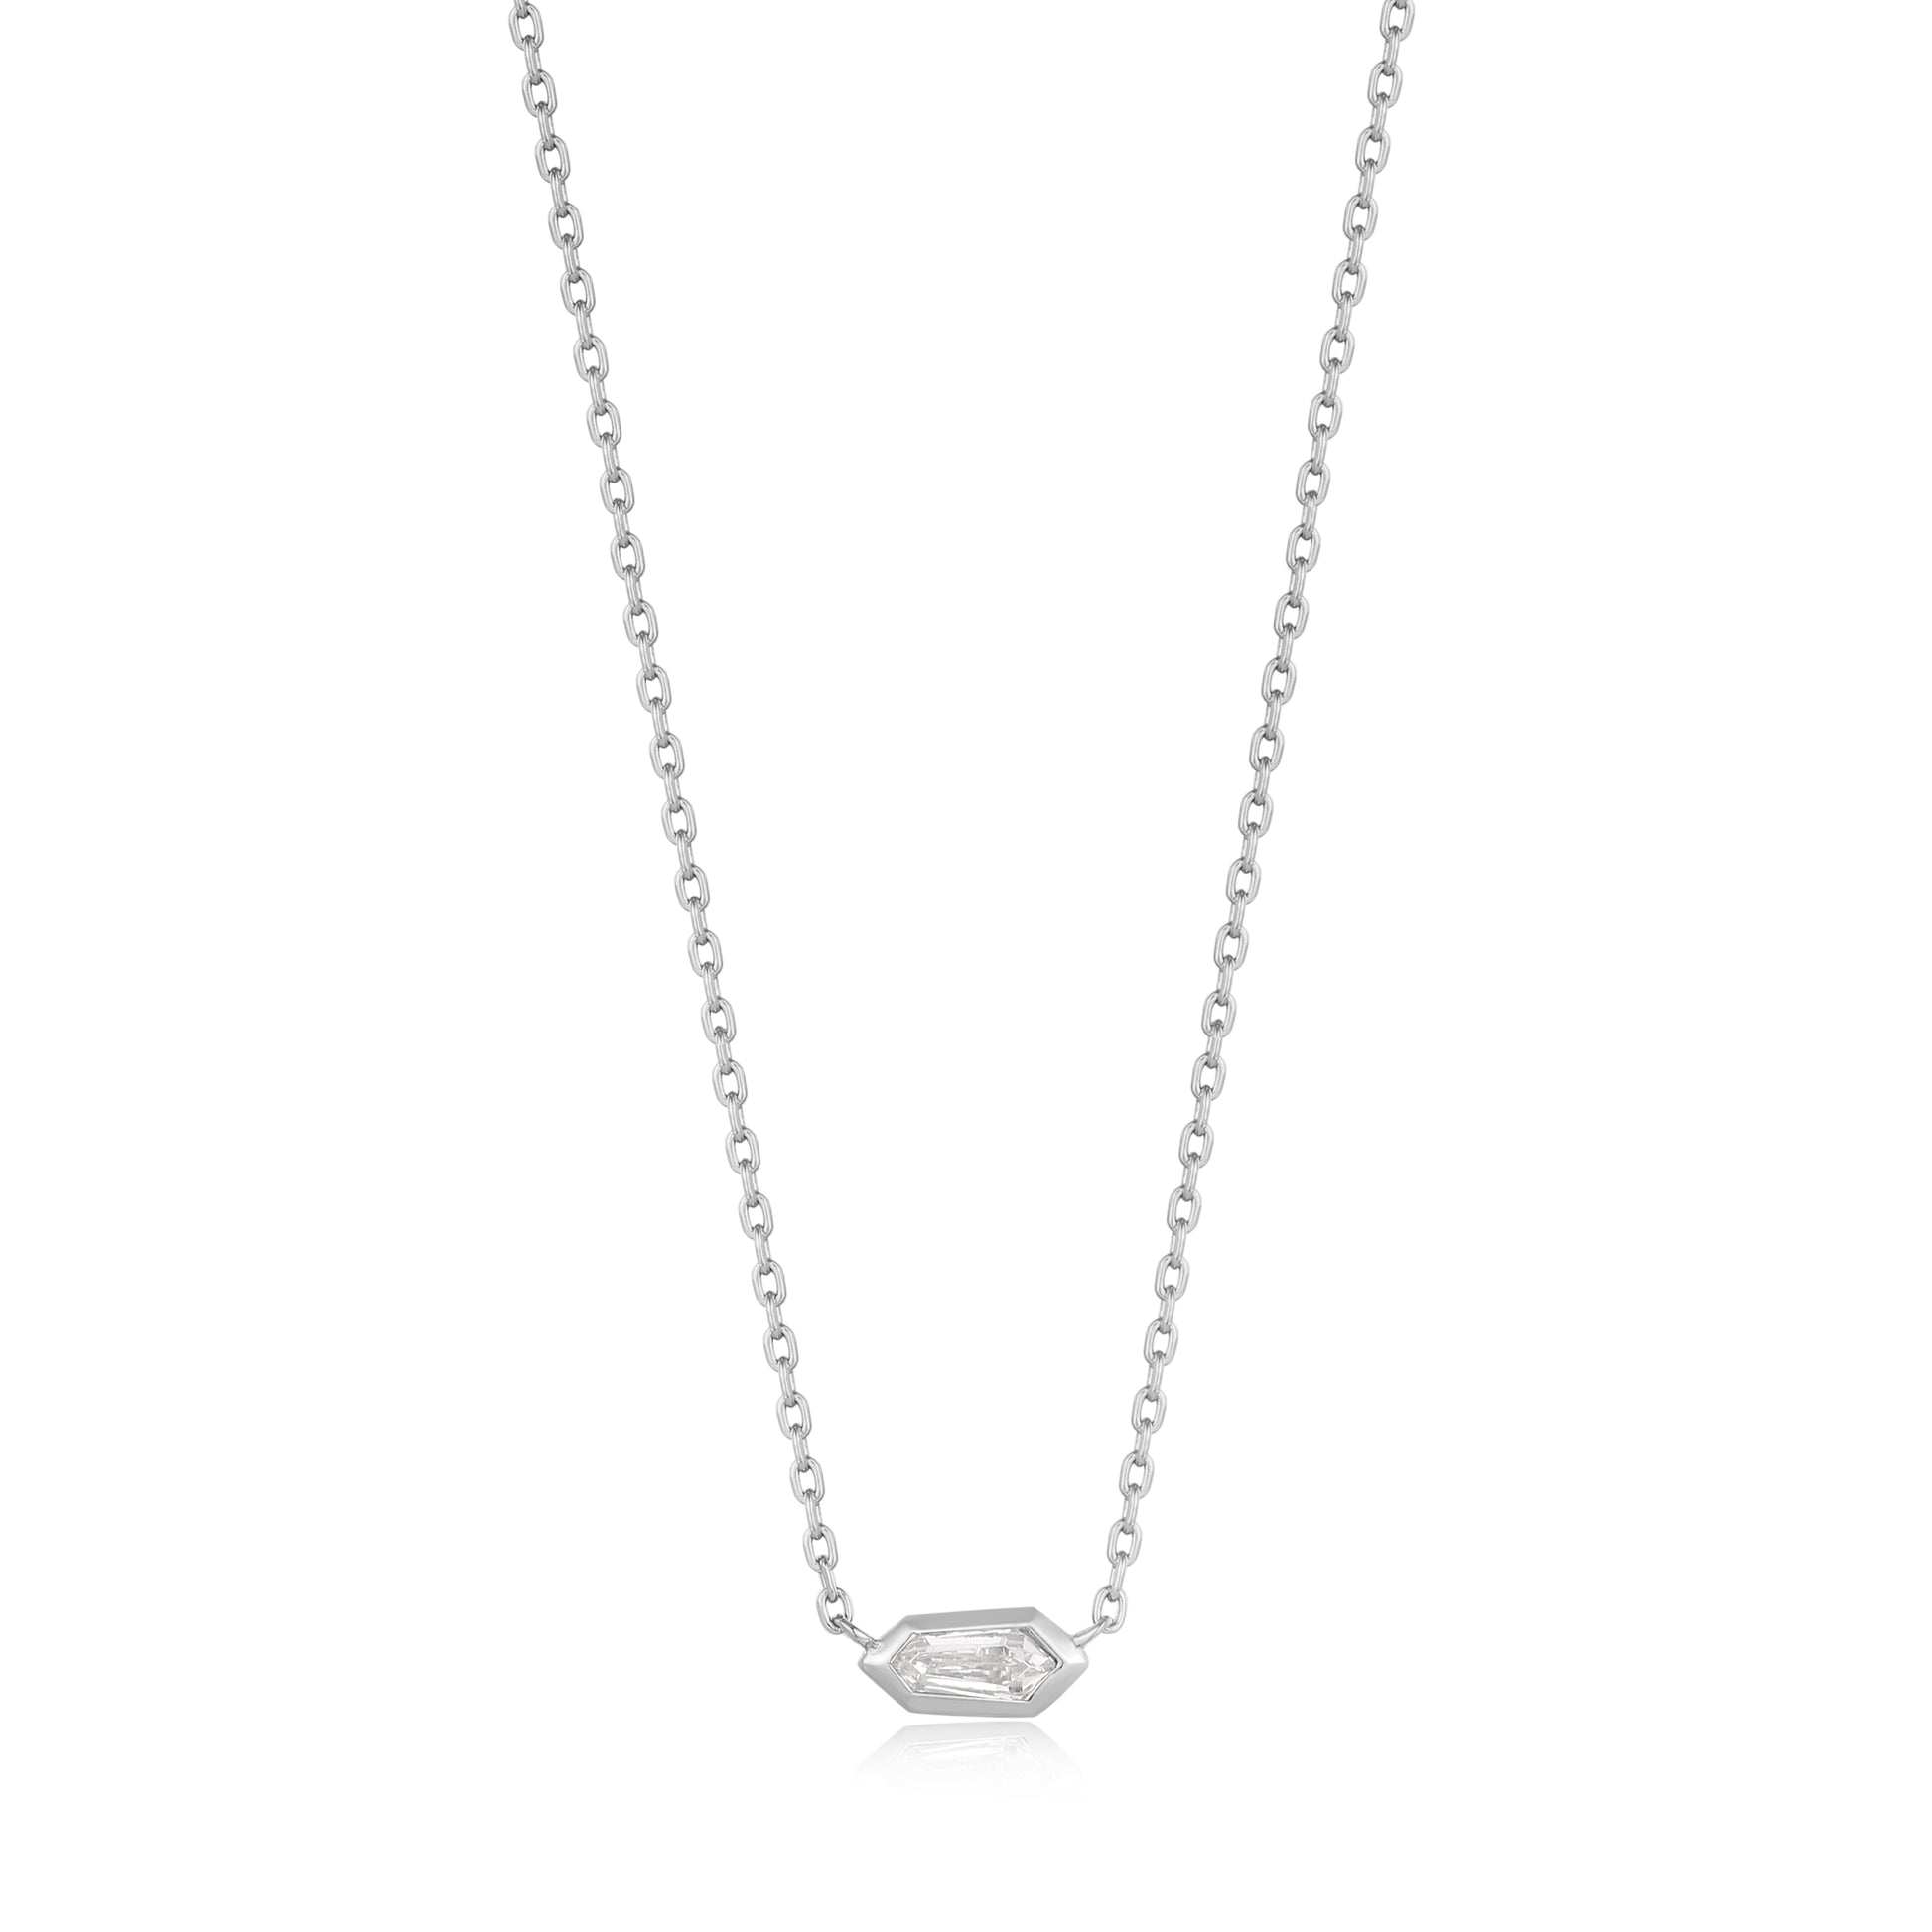 Ania Haie Silver Sparkle Emblem Chain Necklace - Silver Necklace